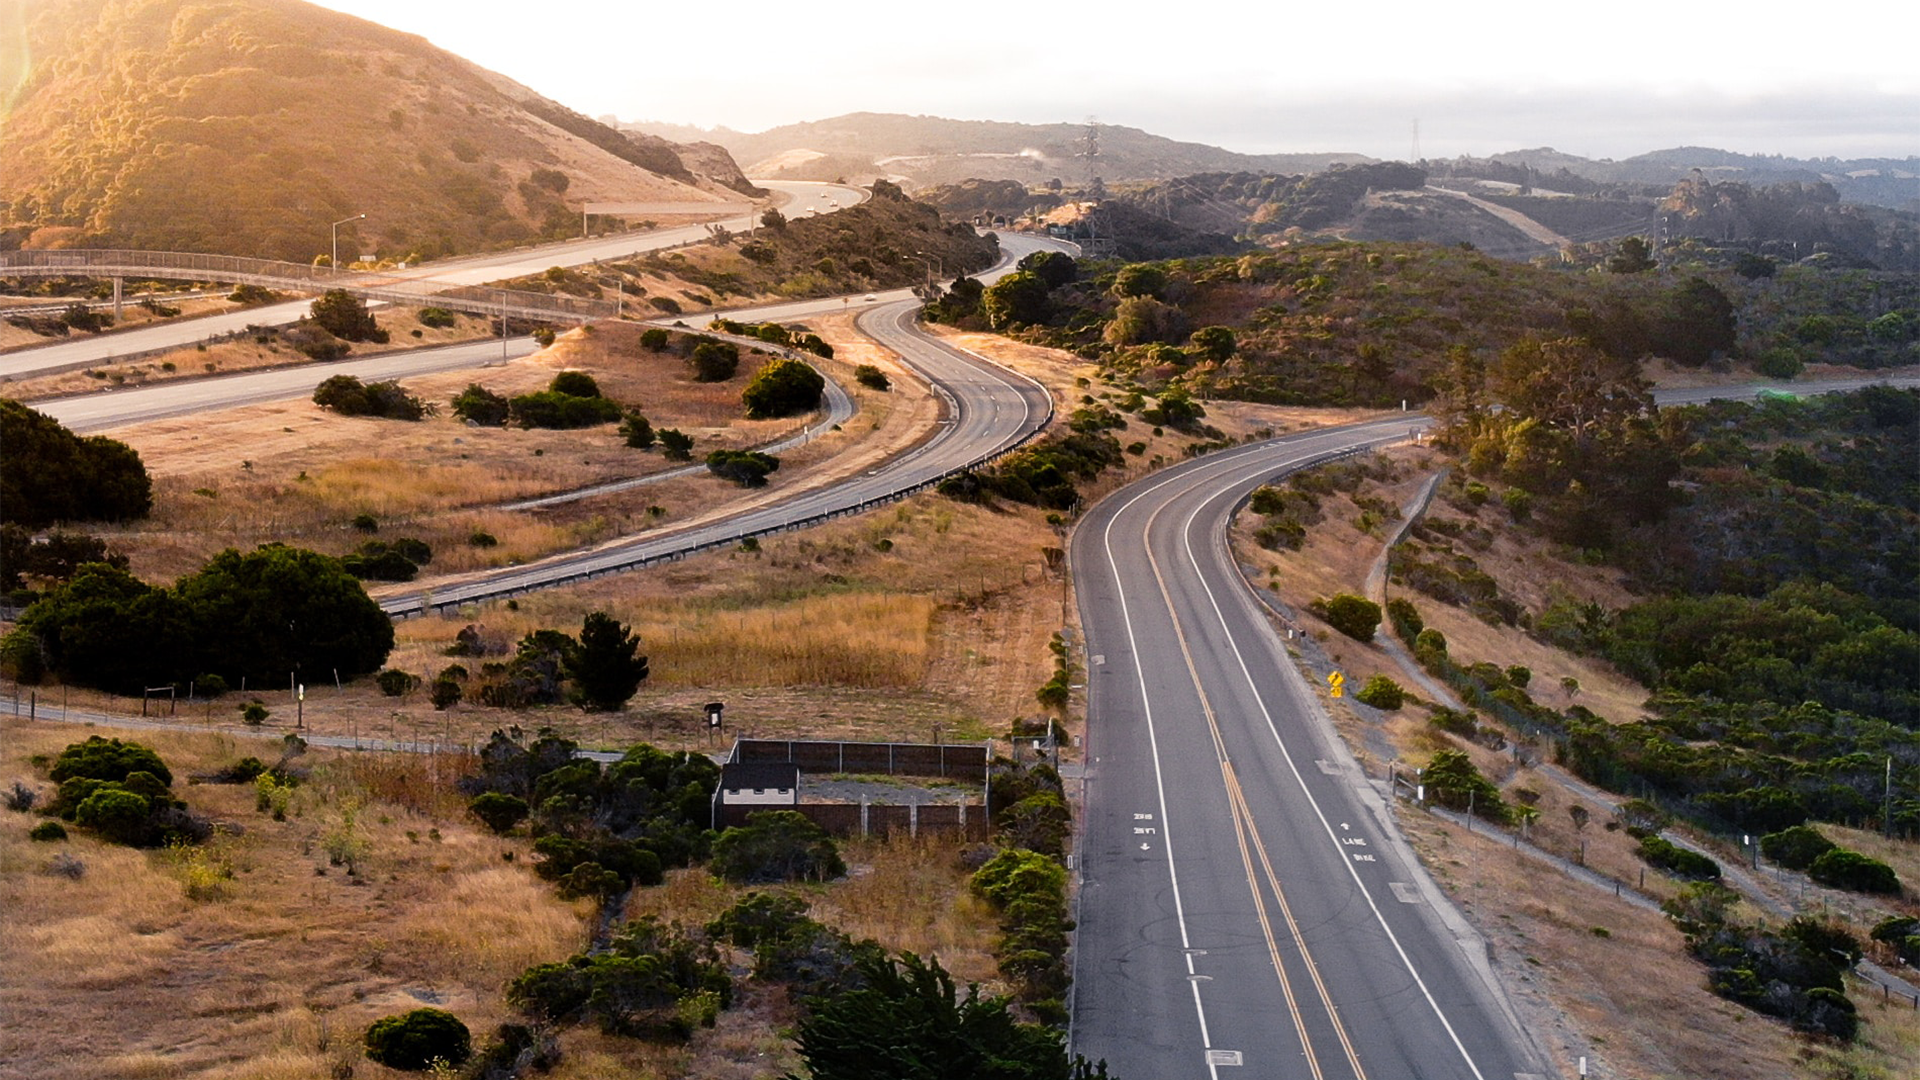 Image of California highway over rolling hills.